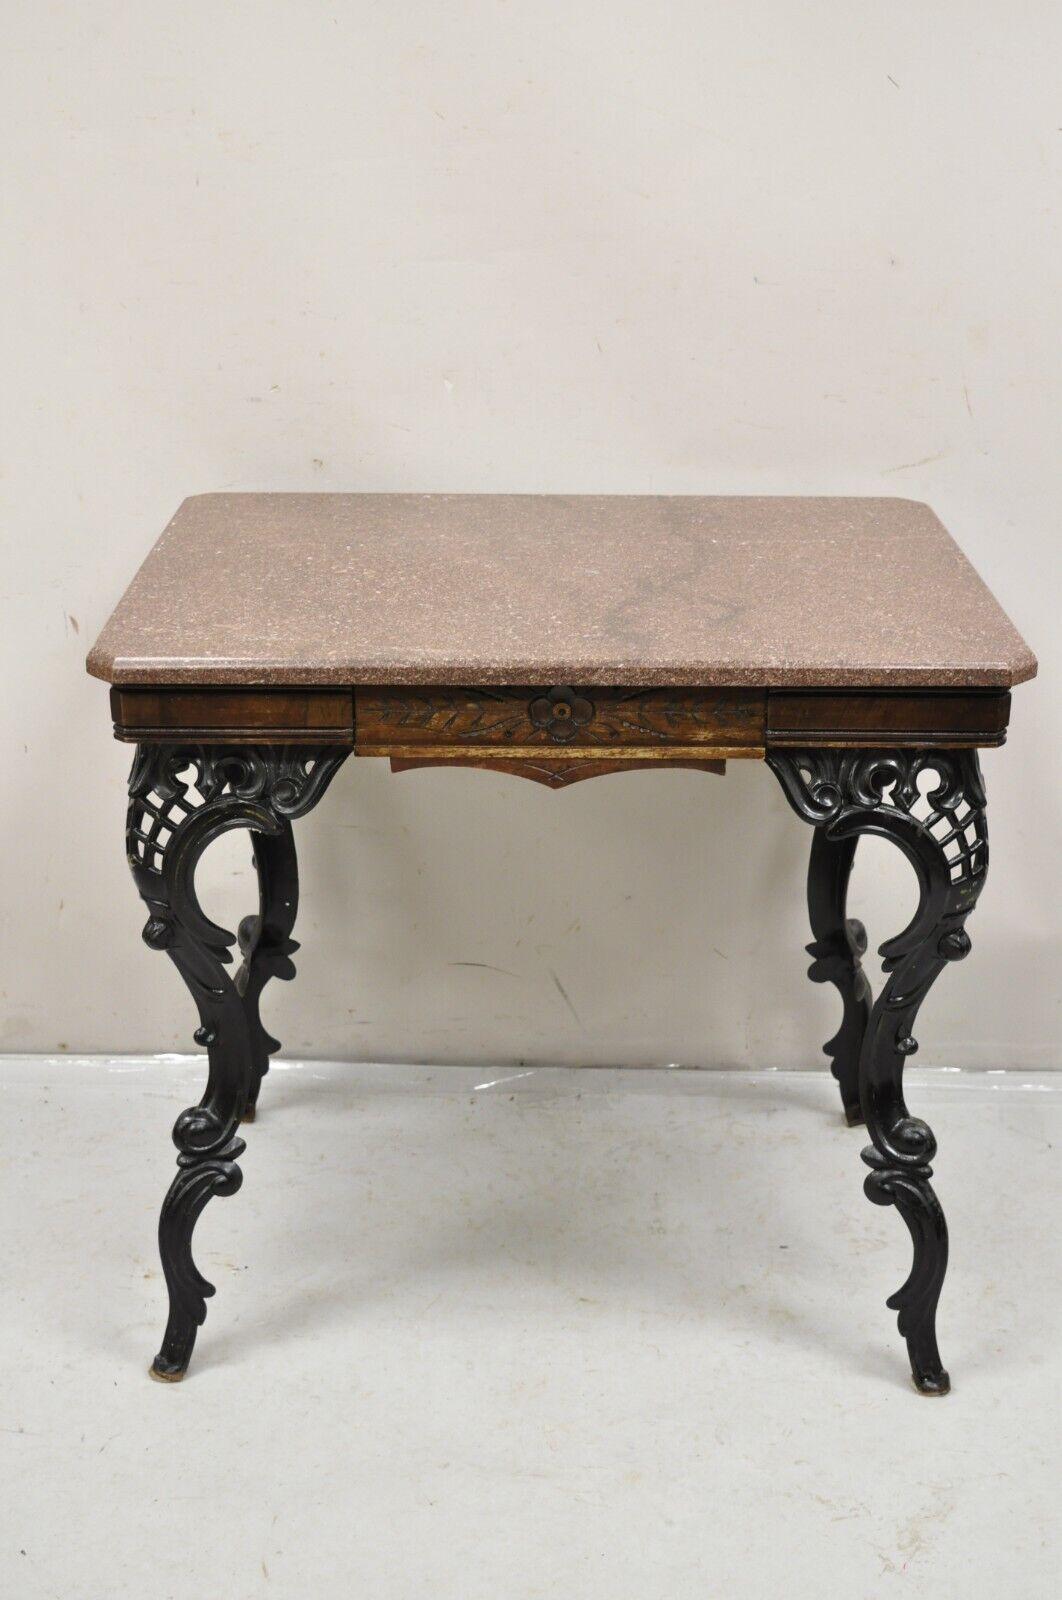 Antique Eastlake Victorian Marble Top Walnut Table with Cast Iron Legs. Item features a unique black cast iron pierced carved cabriole legs, marble top, carved walnut skirt, very nice antique item. Circa 19th Century. Measurements: 28